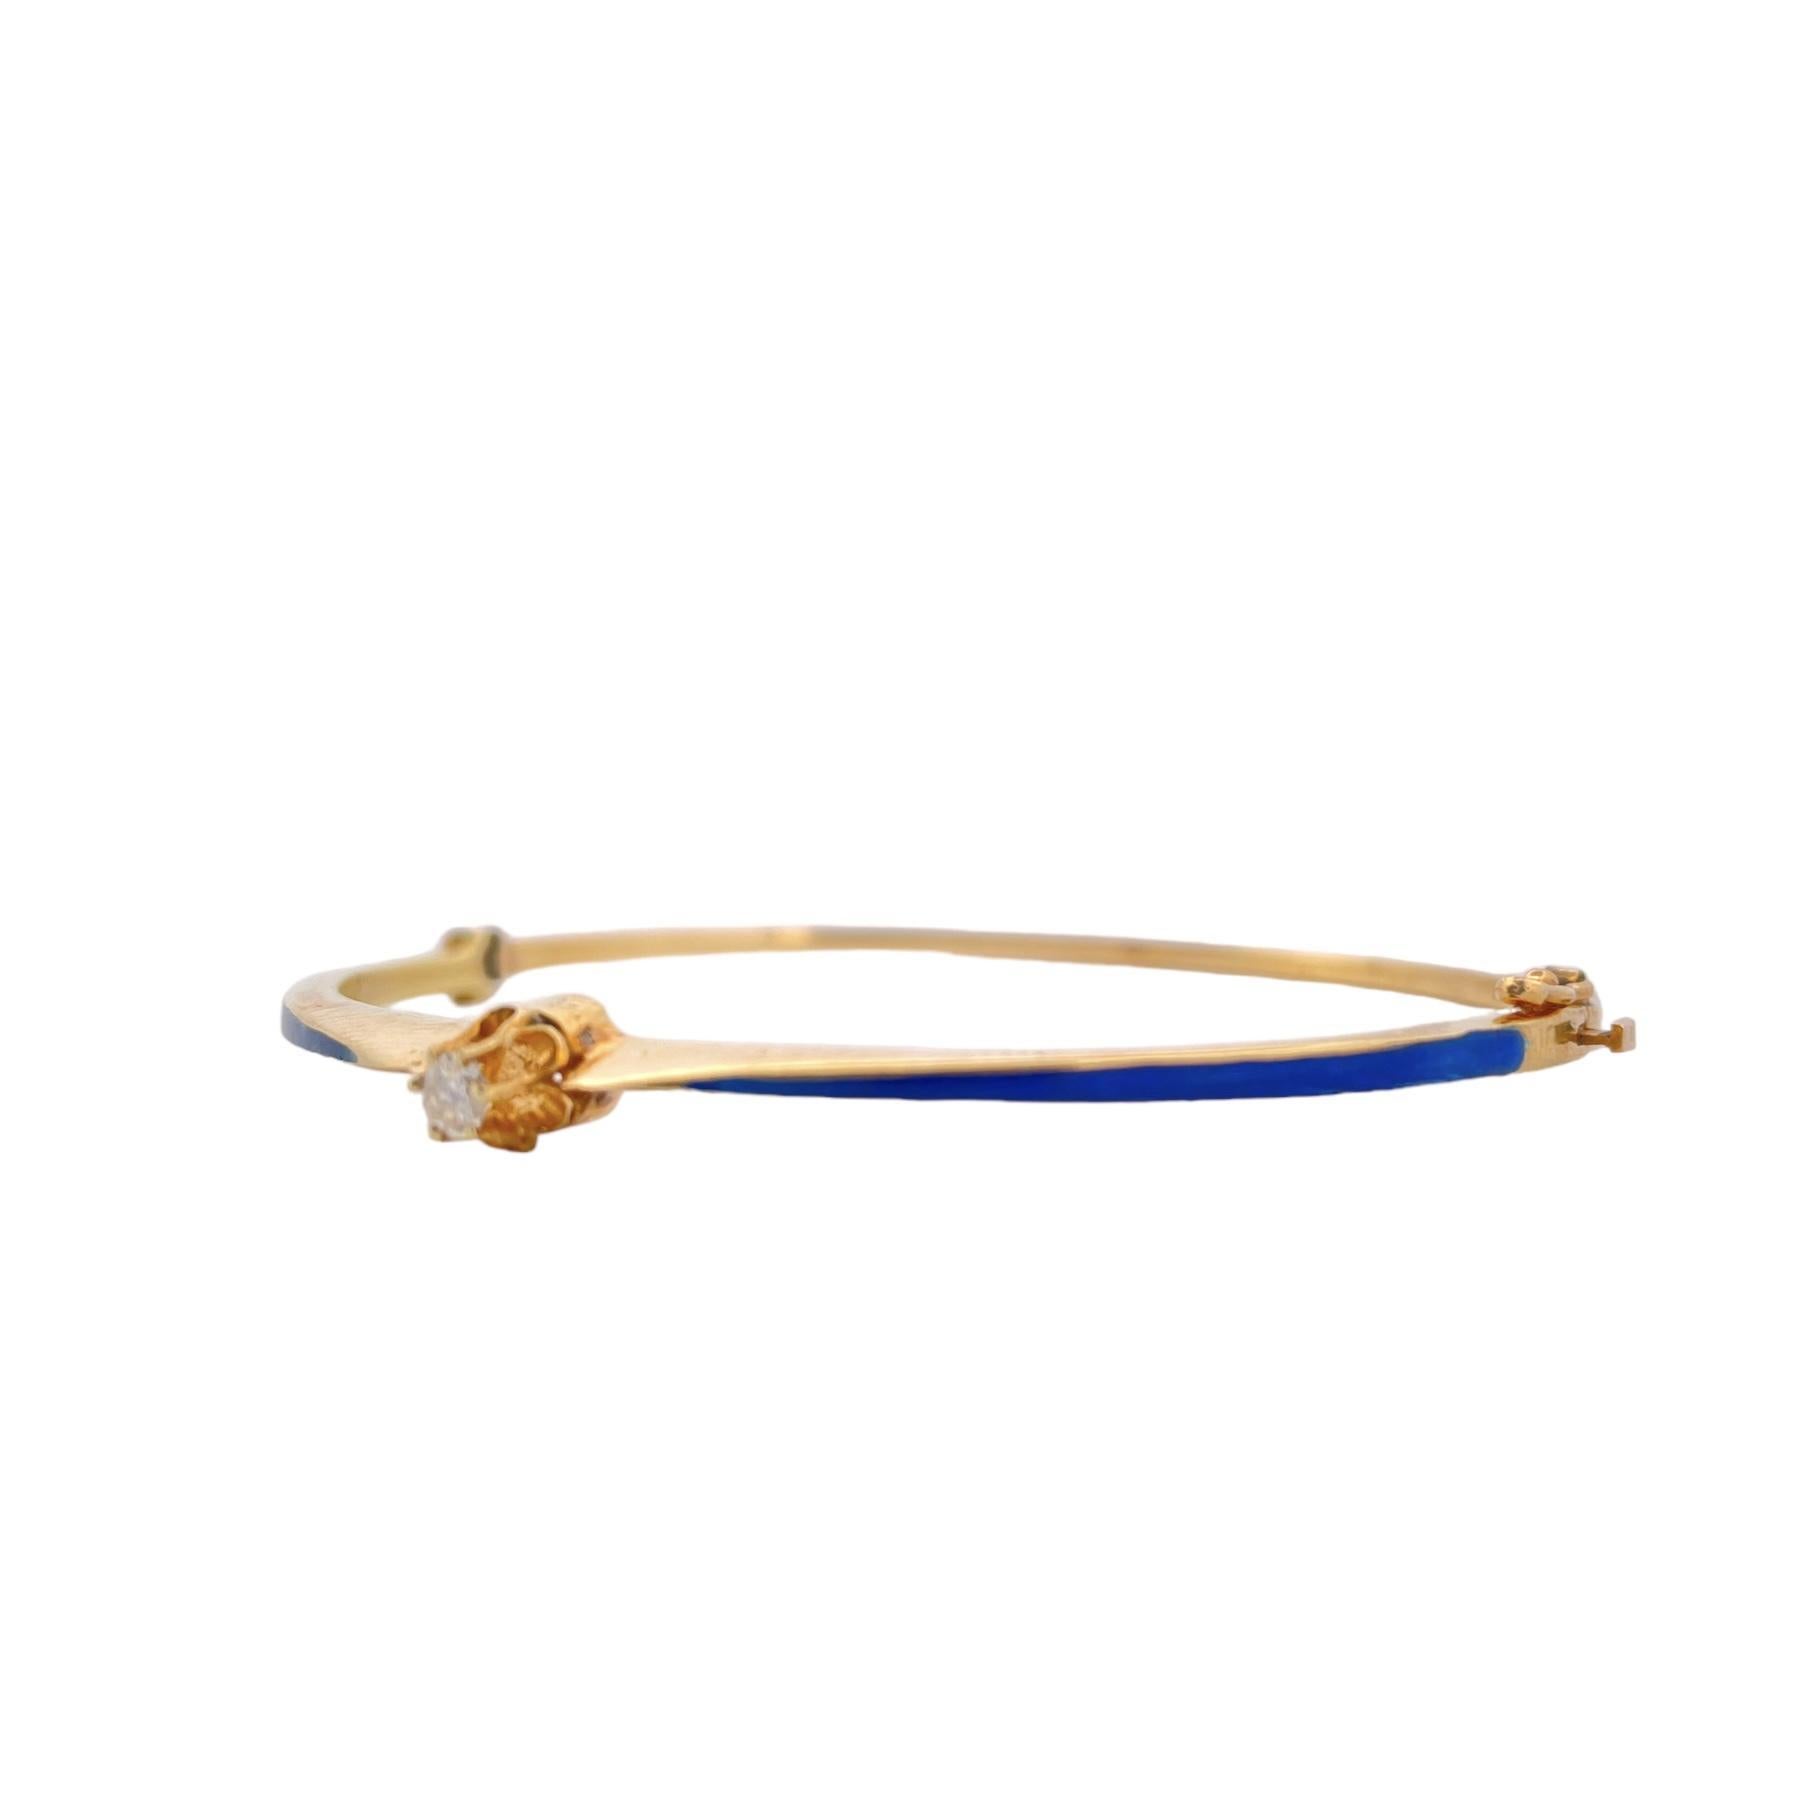 Indulge in the timeless charm of our Blue Enamel Diamond Bangle, a masterpiece that effortlessly combines the brilliance of diamonds with the vibrant allure of blue enamel. This exquisite bangle is crafted in gleaming 14K yellow gold and adorned